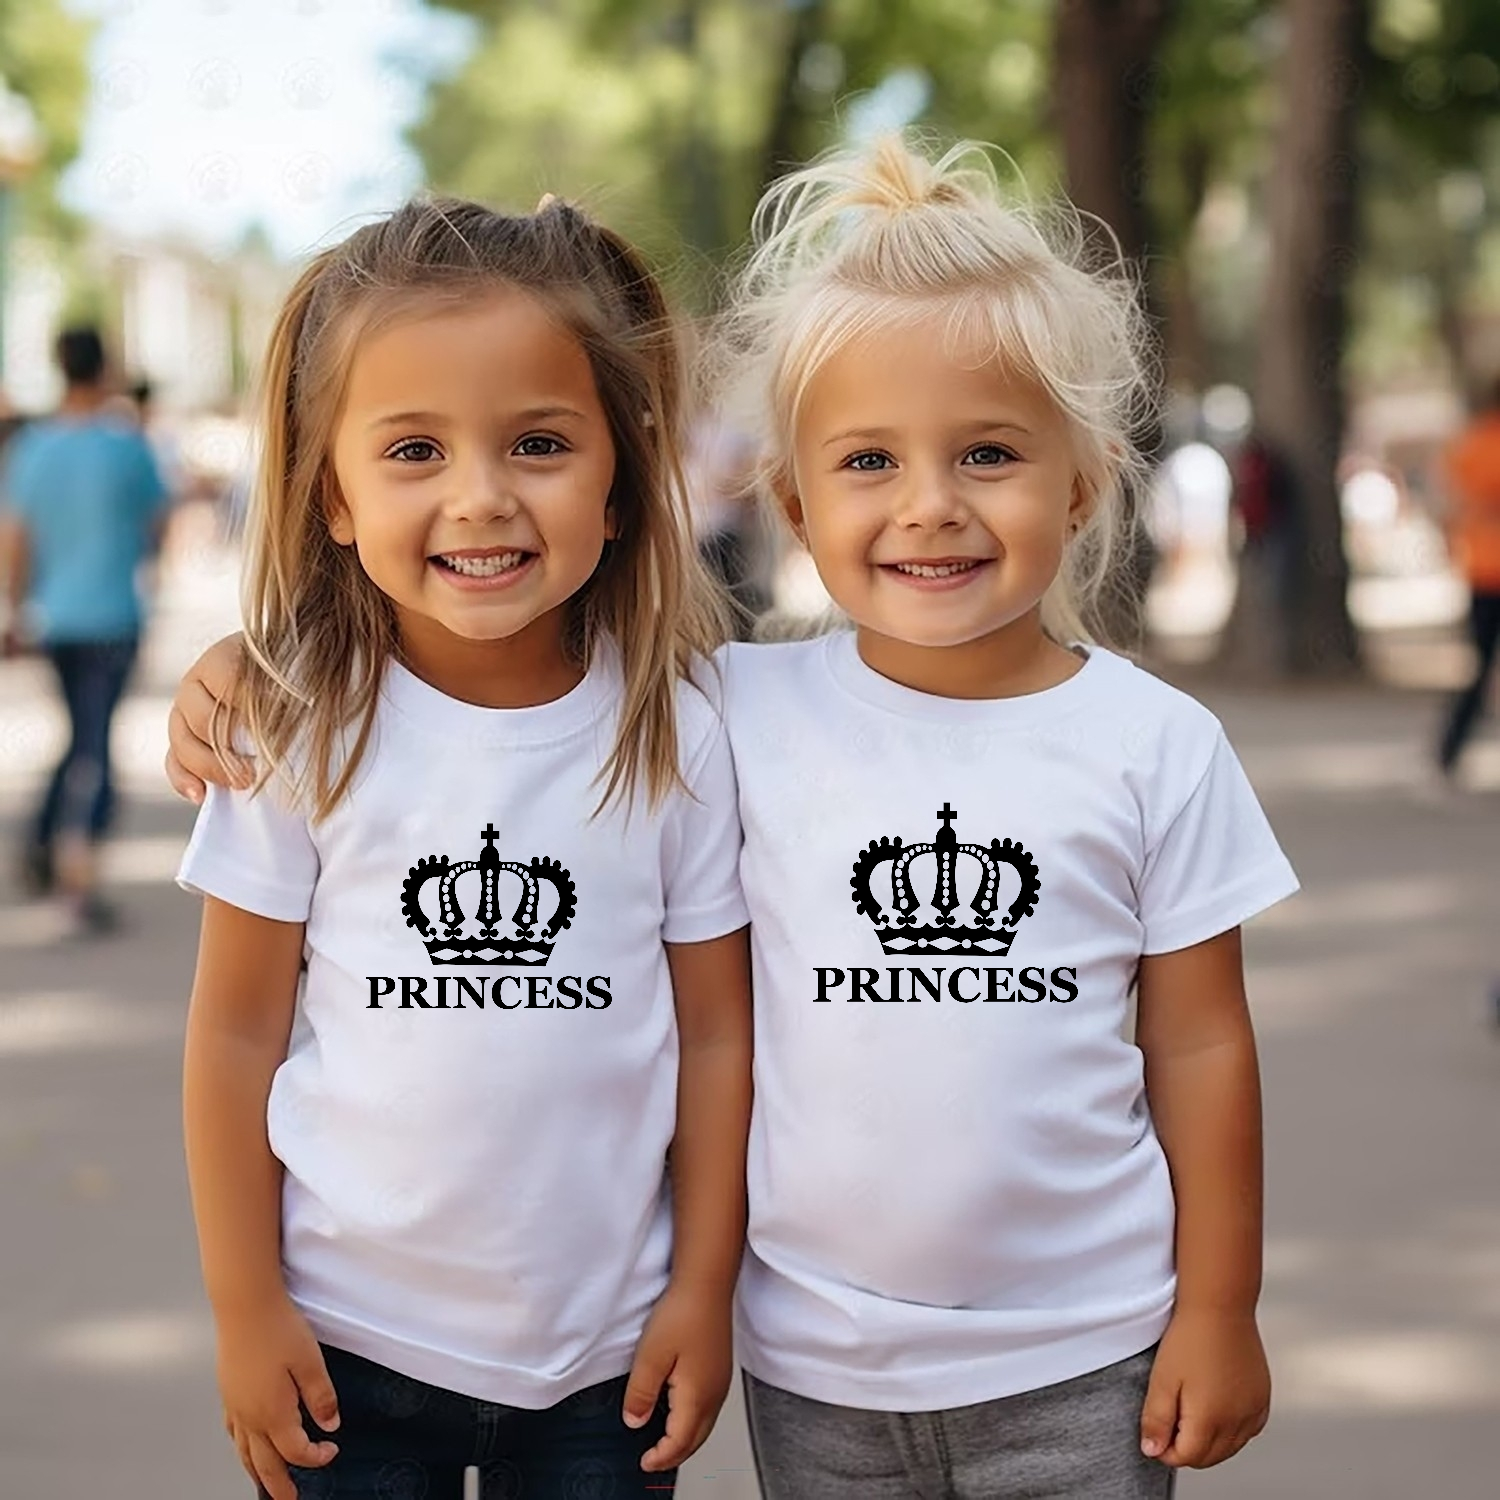 Crown King-Queen-Prinss-Prince T-shirt